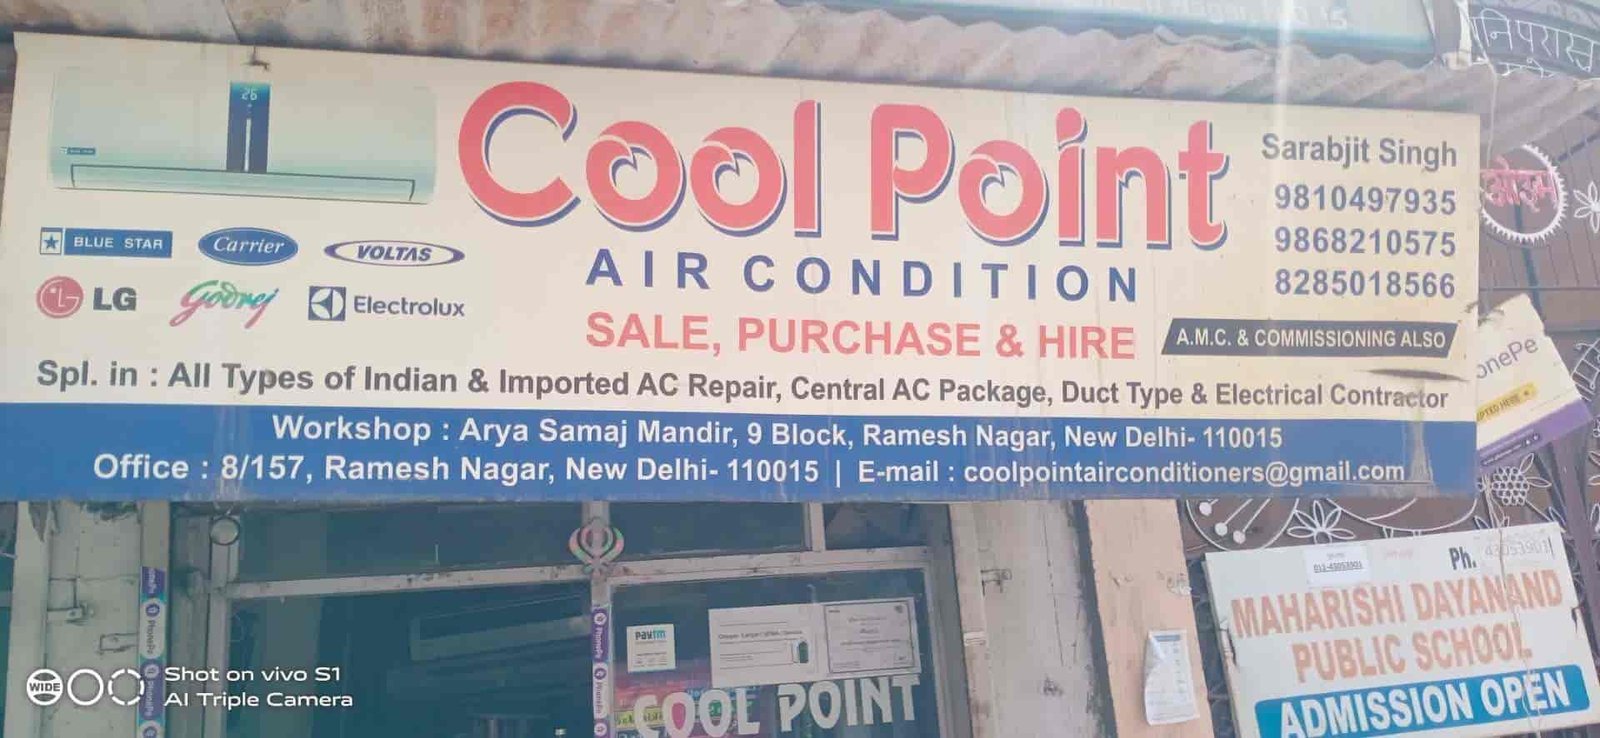 Cool Point Air Condition